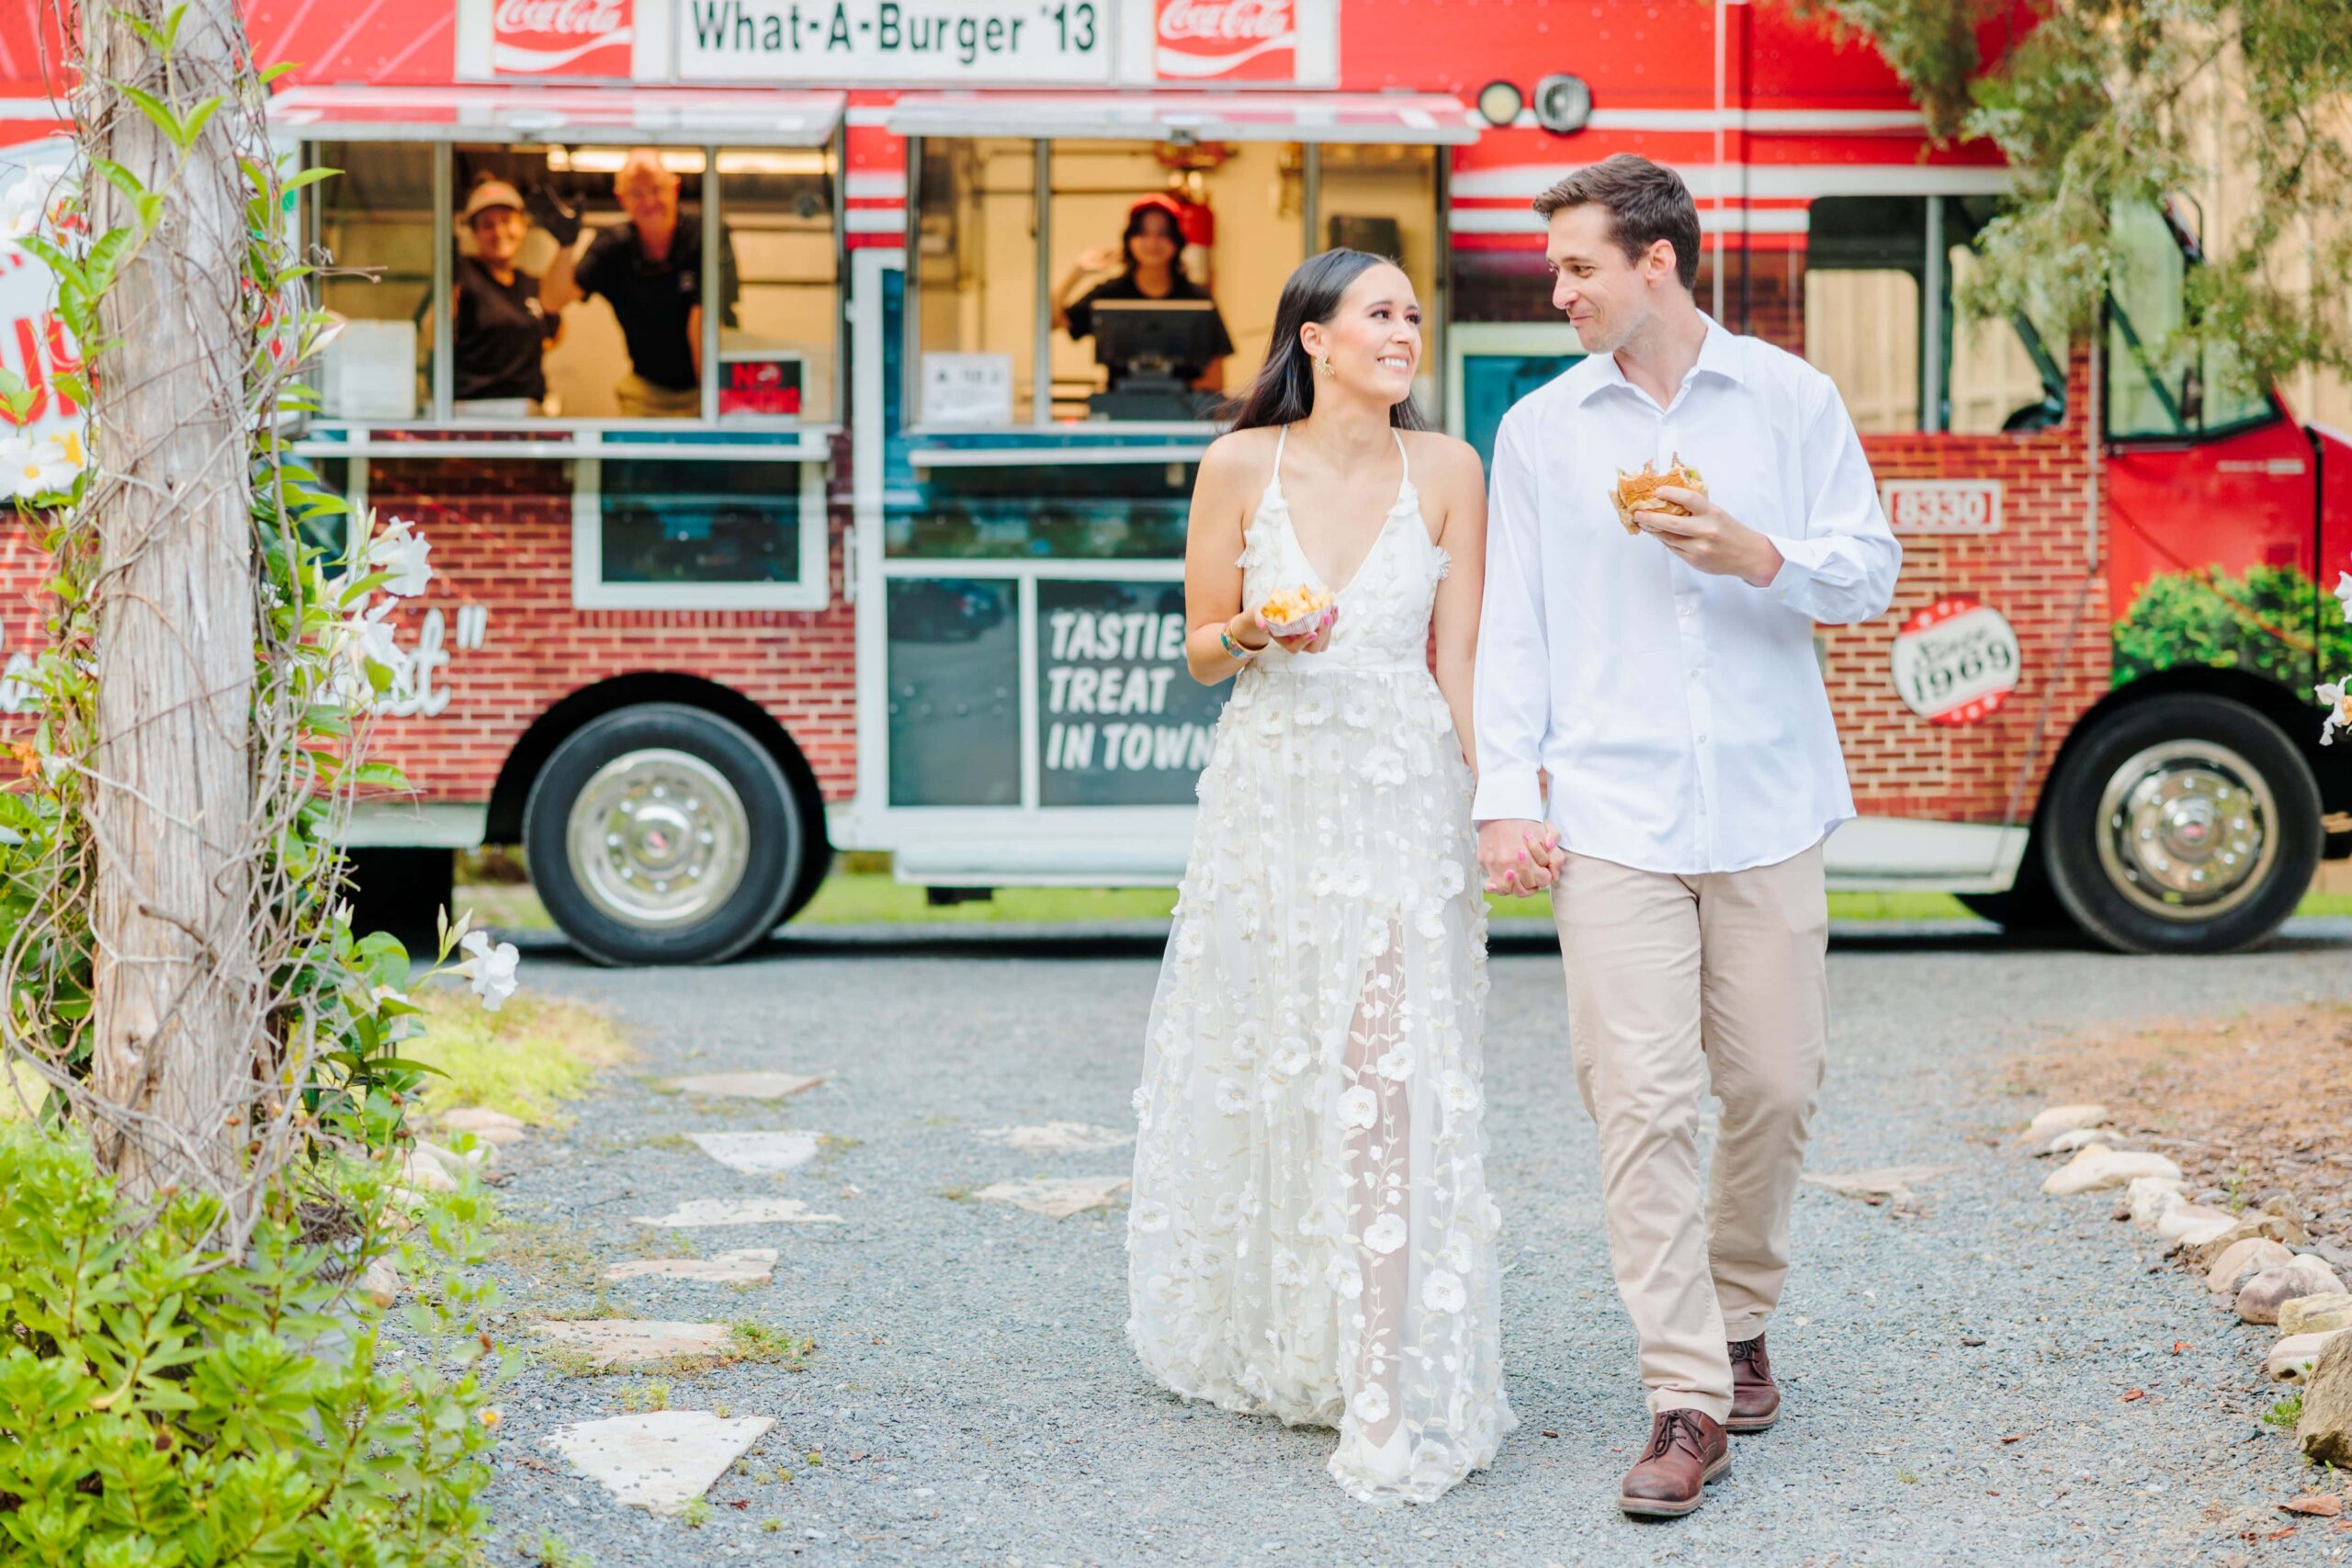 This retro disco wedding was catered by an old-timey red food truck serving hamburgers and fries.